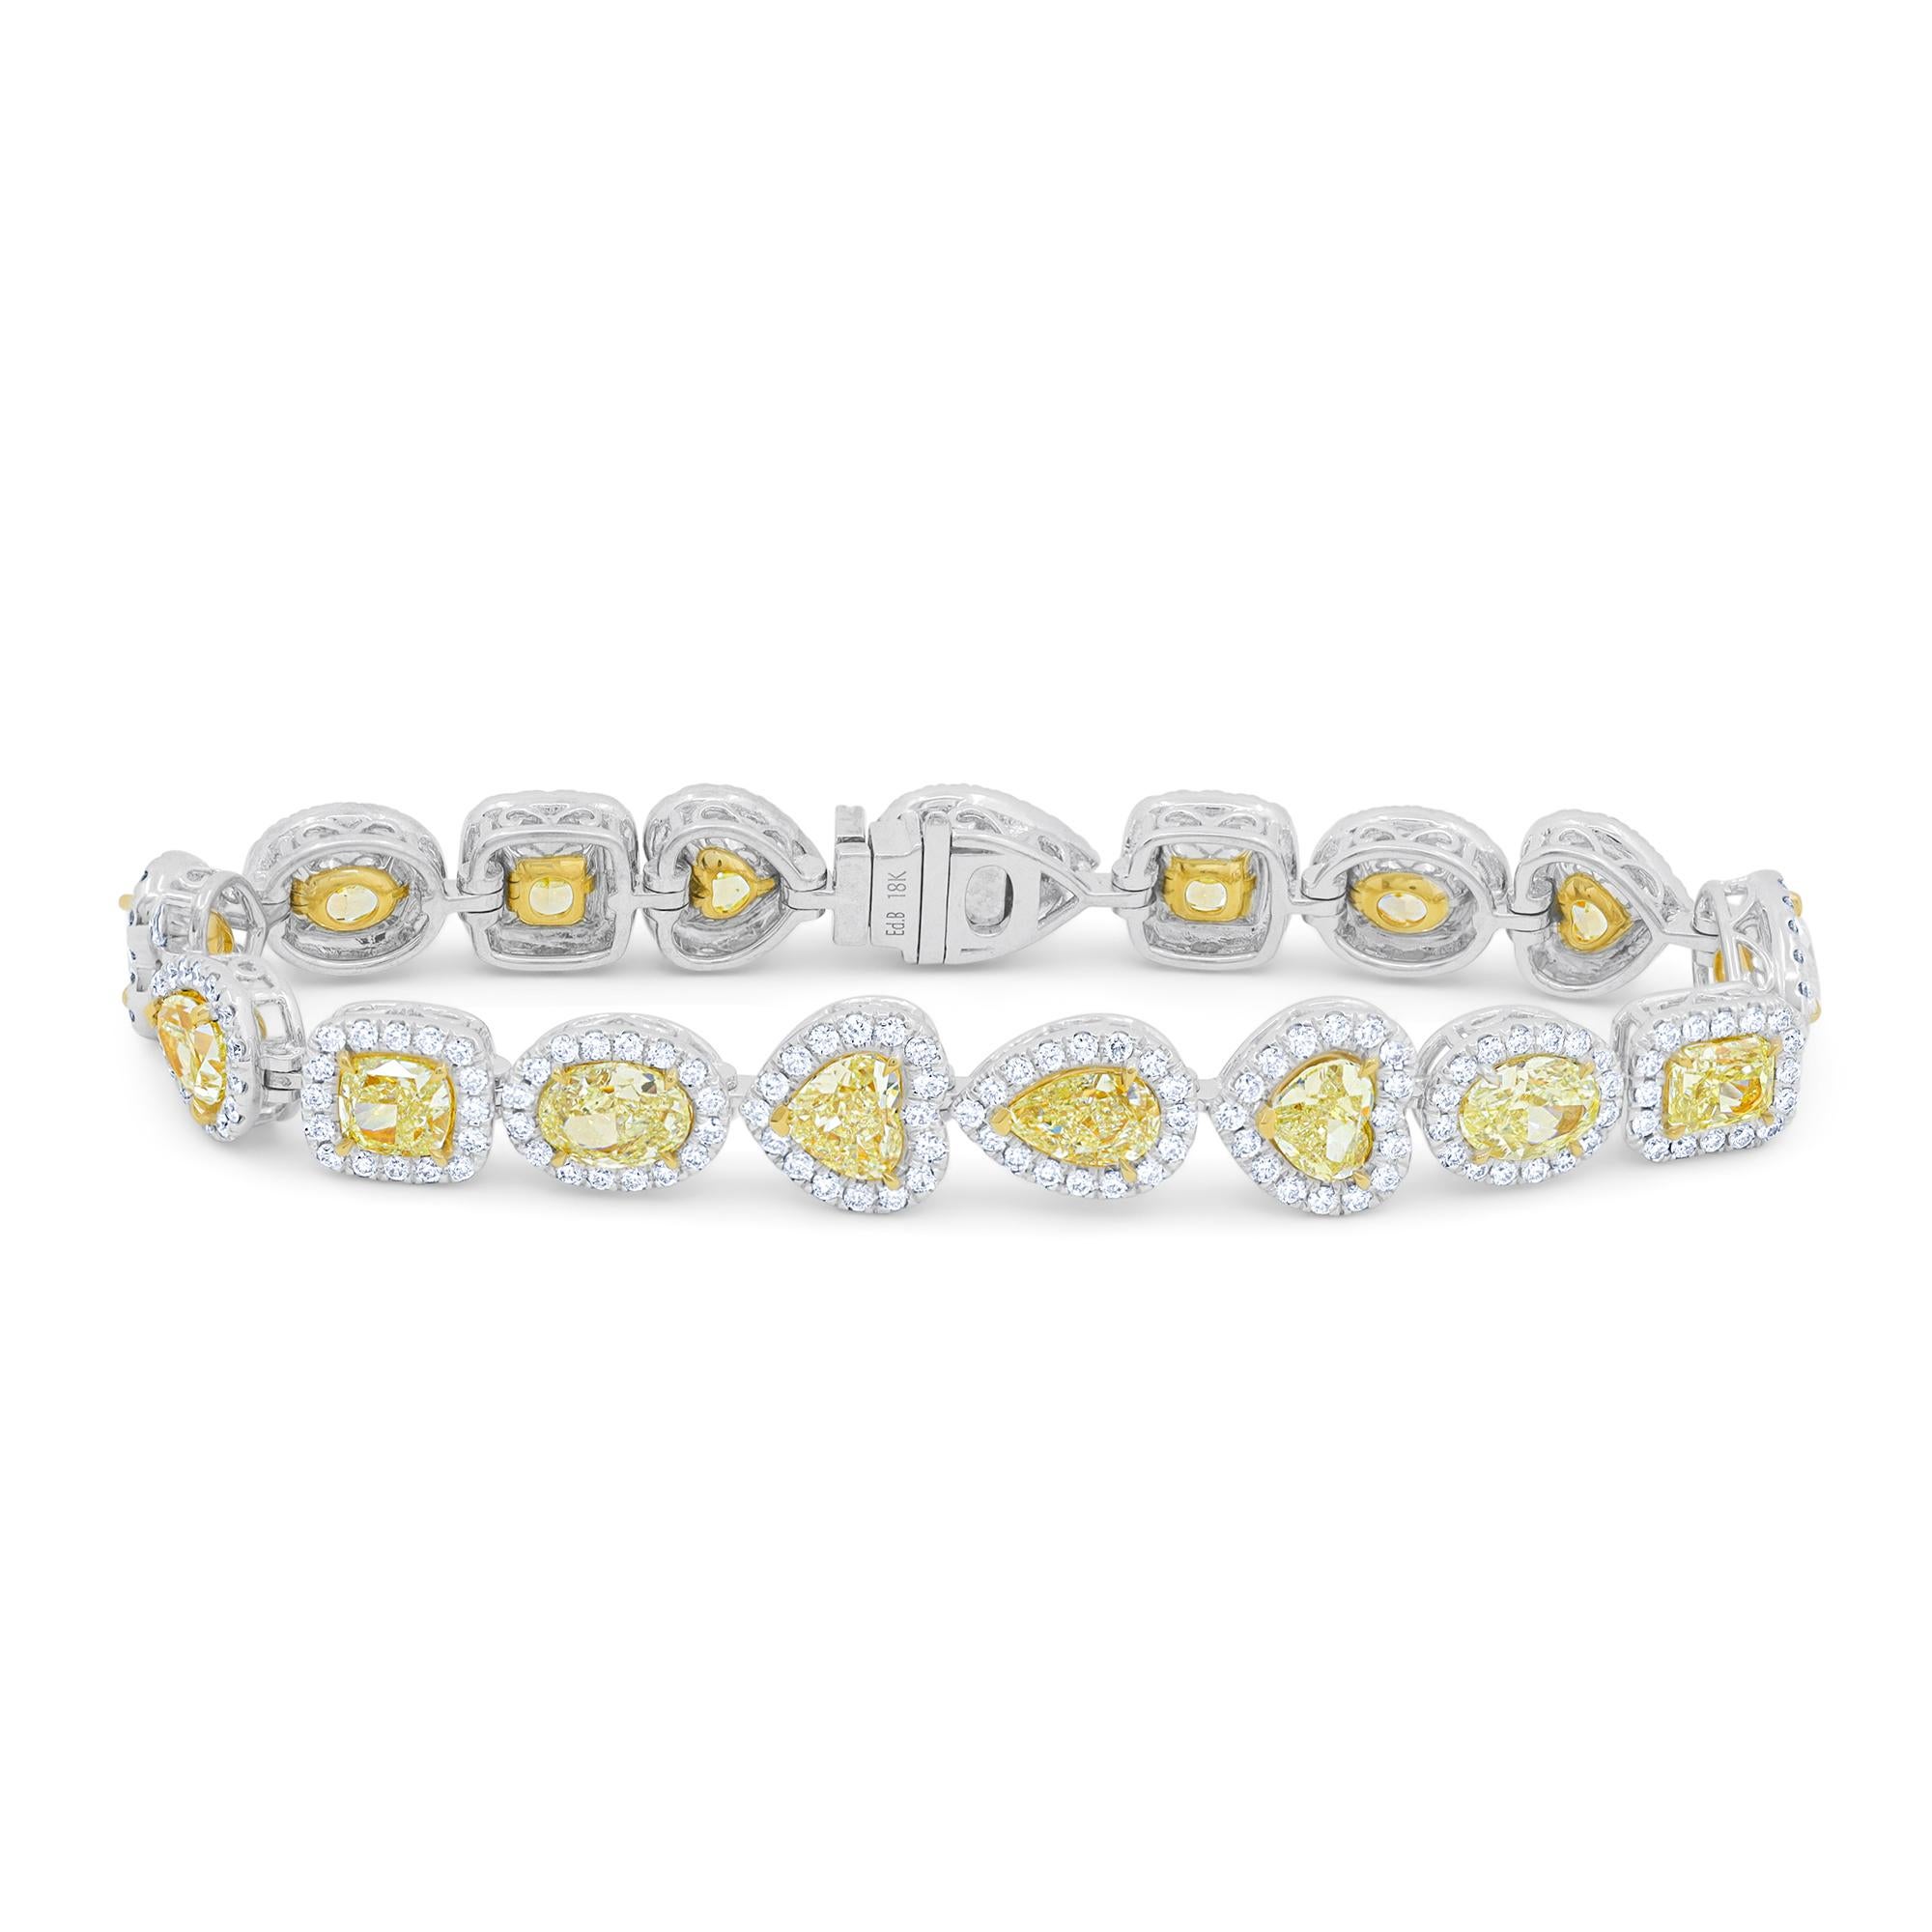 18KT MULTI SHAPE DIAMOND BRACELET WITH 18.79cts  FANCY YELLOW DIAMONDS  VS TO SI CLARITY  SURONDED BY 4.10CTS OF HALO 